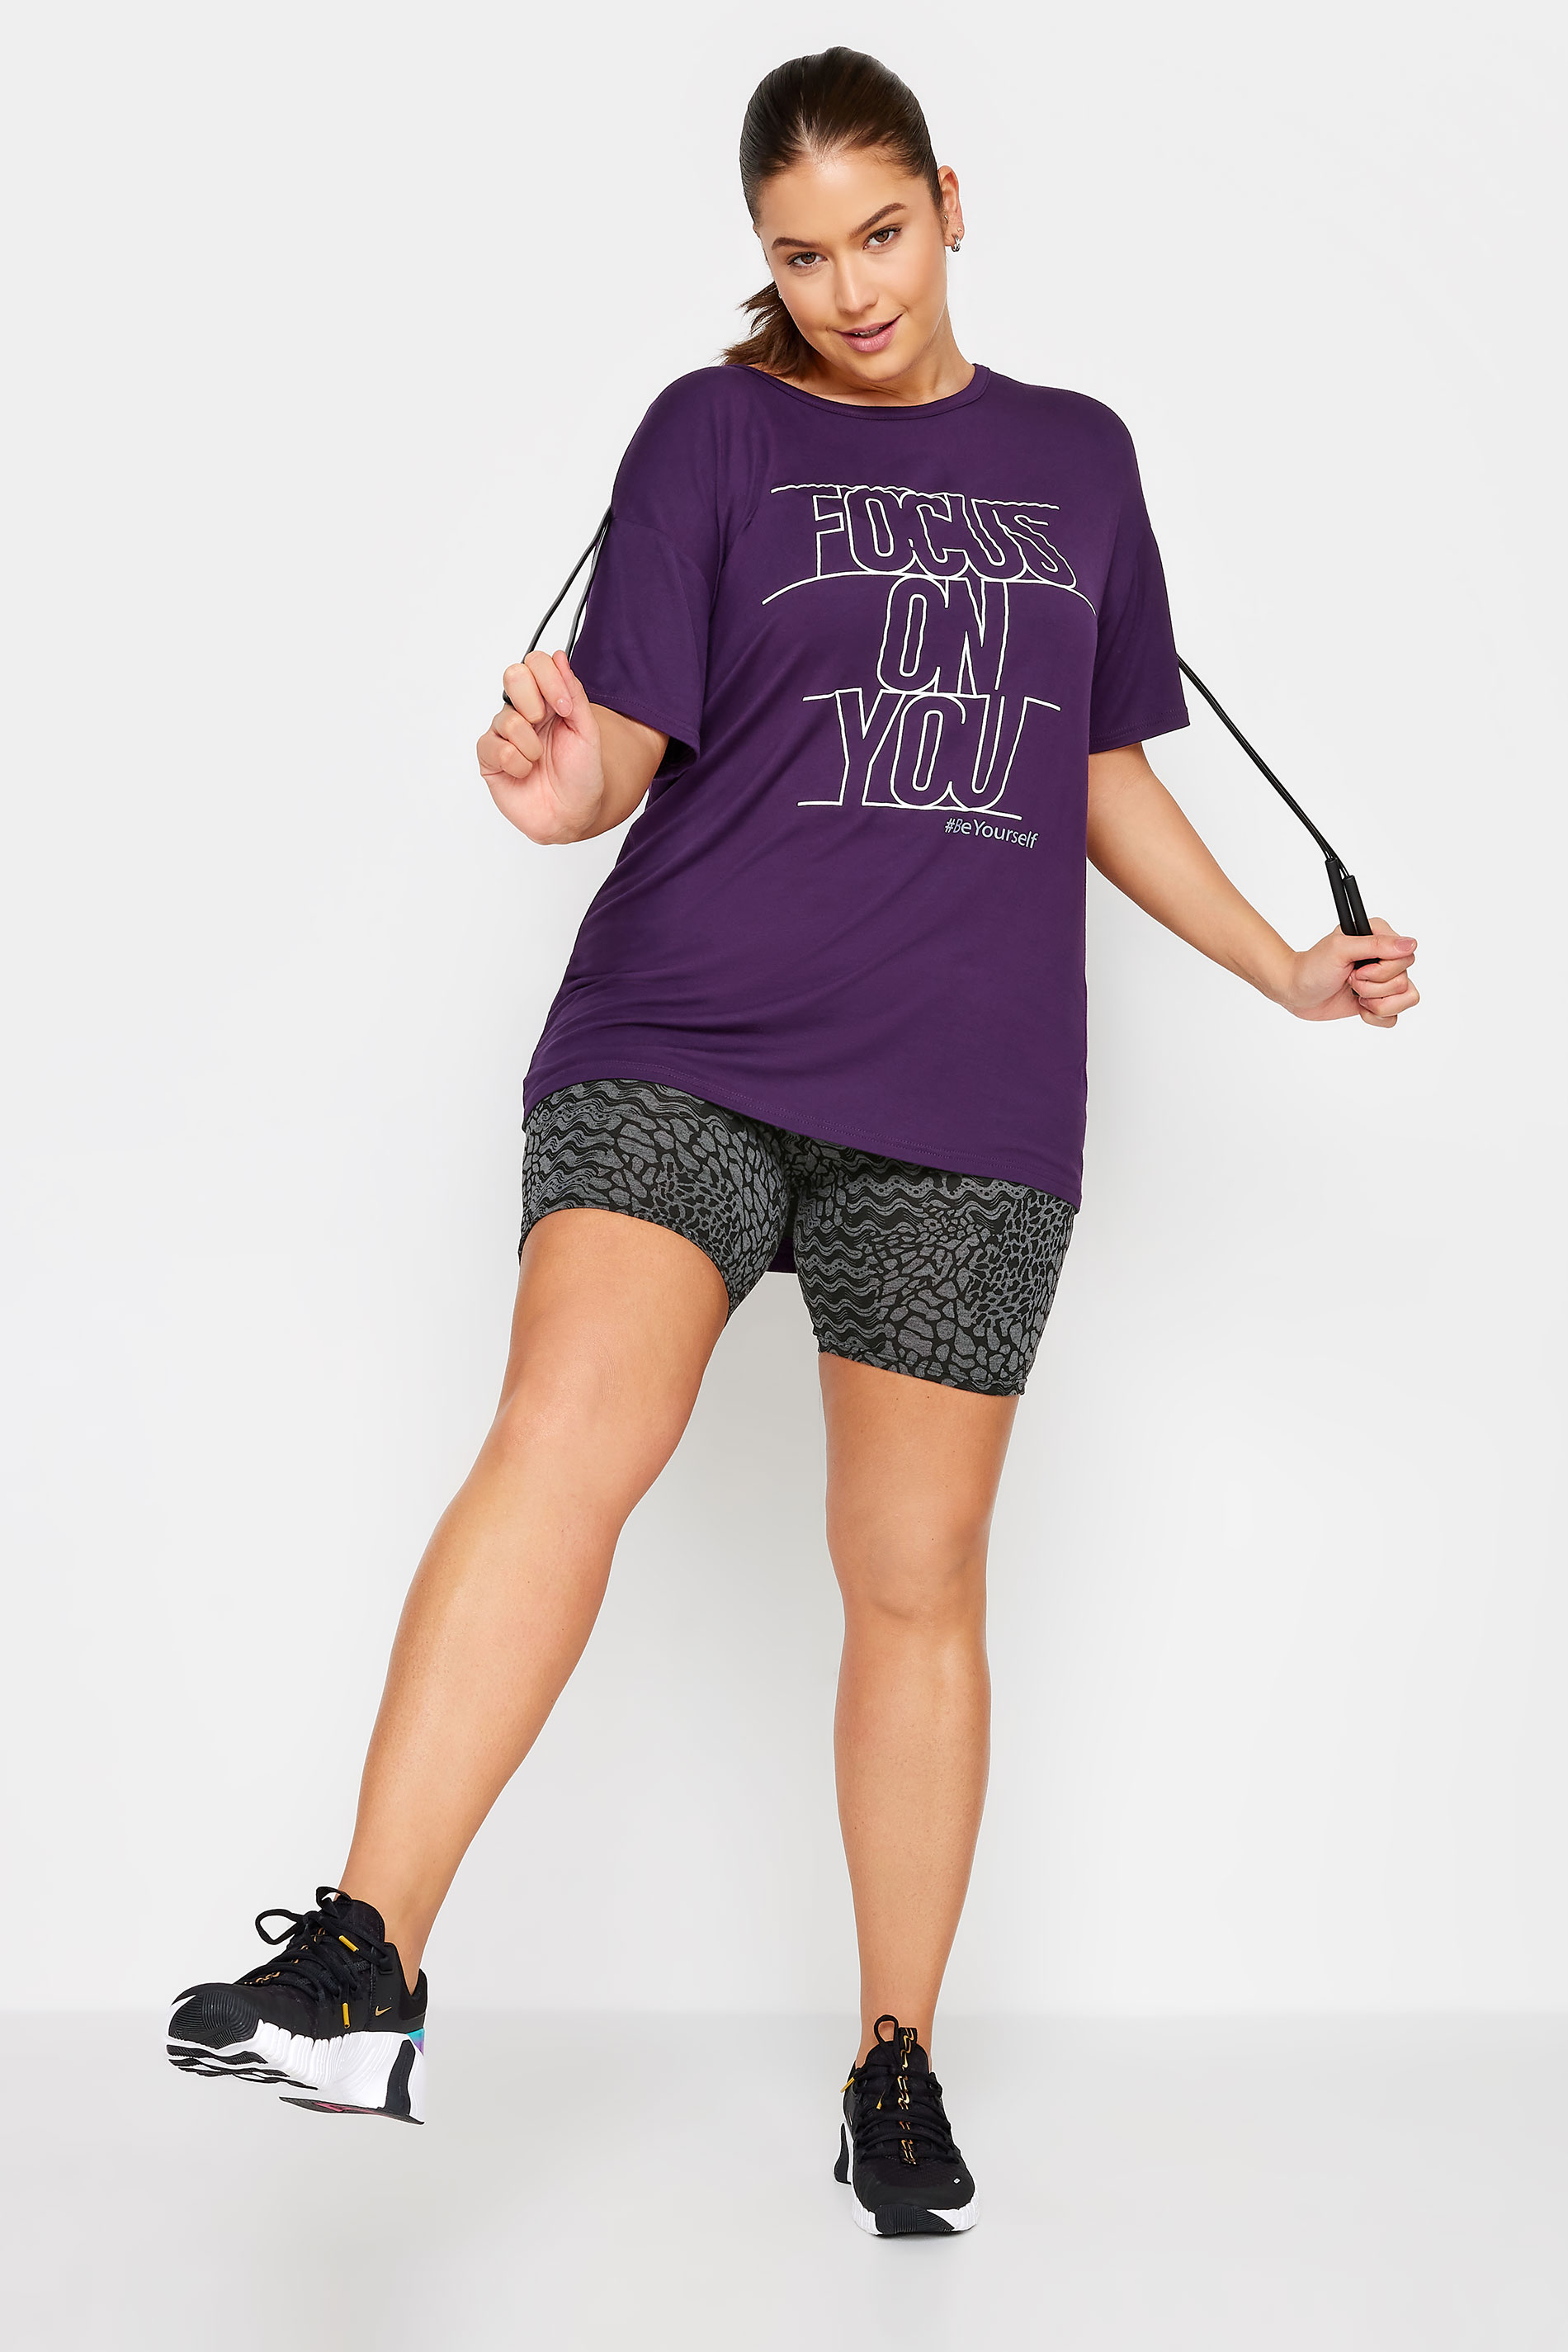 YOURS ACTIVE Plus Size Purple 'Focus On You' Slogan Top | Yours Clothing 3